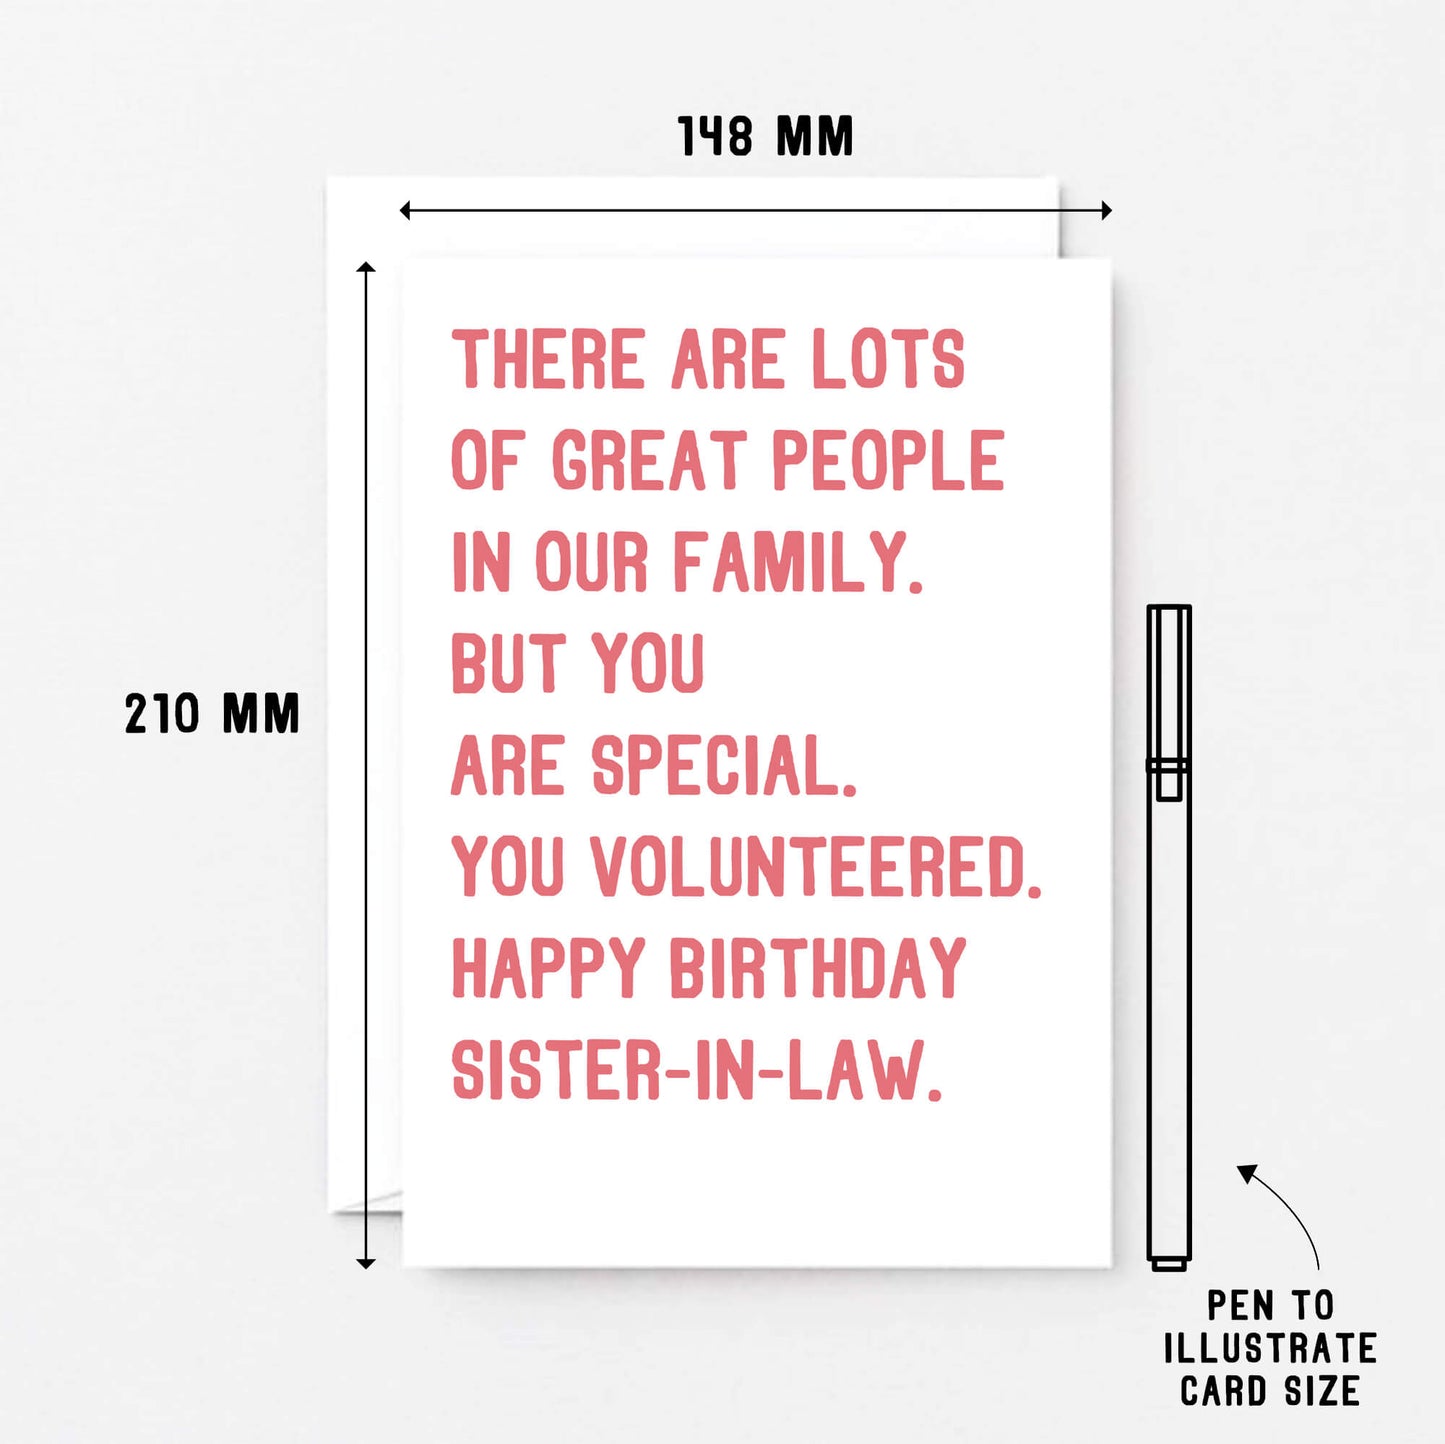 Sister-in-Law Birthday Card by SixElevenCreations. Reads There are lots of great people in our family. But you are special. You volunteered. Happy birthday sister-in-law. Product Code SE2019A5